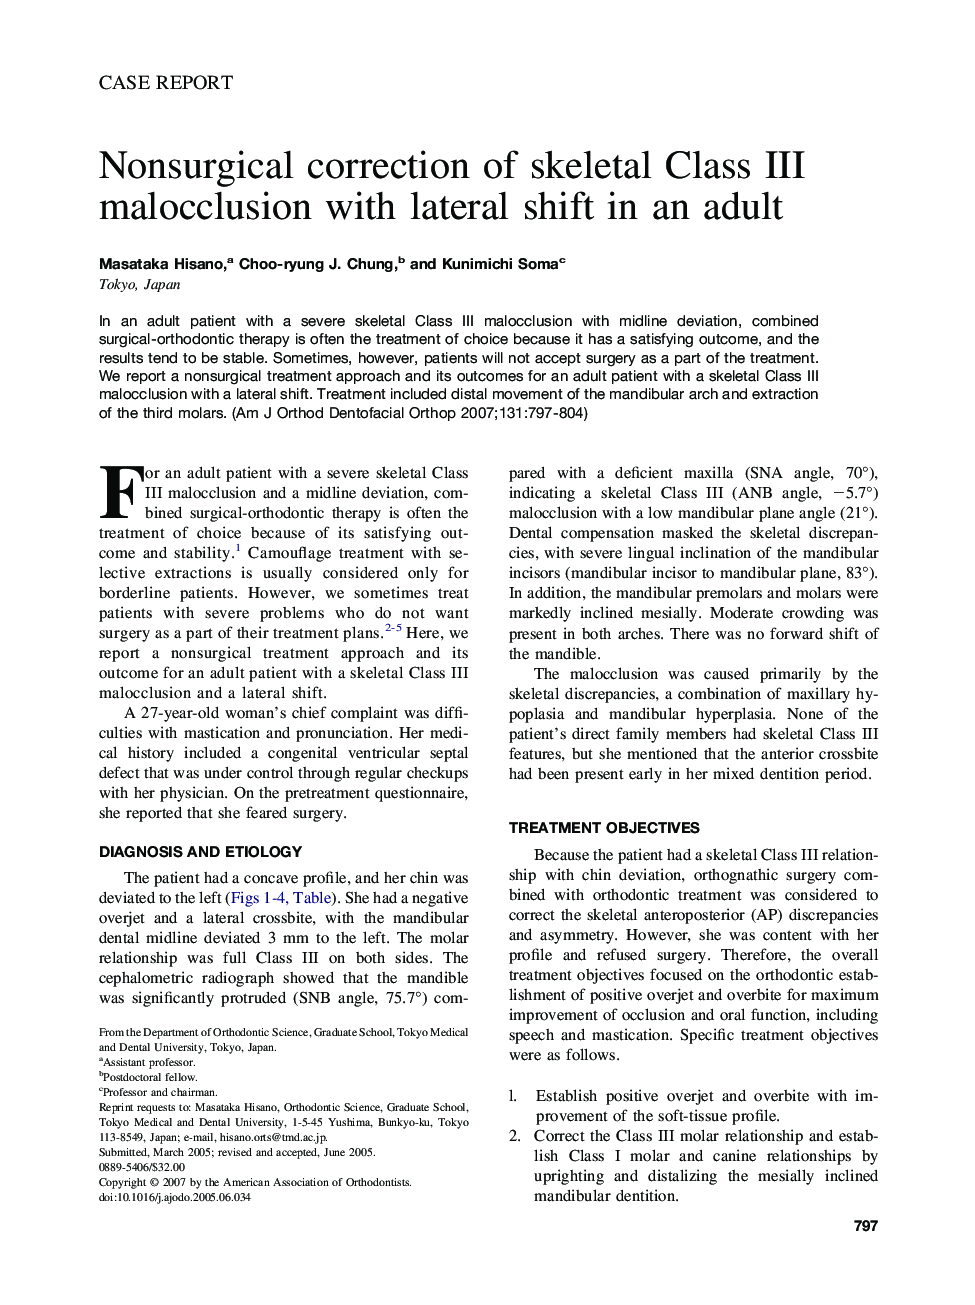 Nonsurgical correction of skeletal Class III malocclusion with lateral shift in an adult